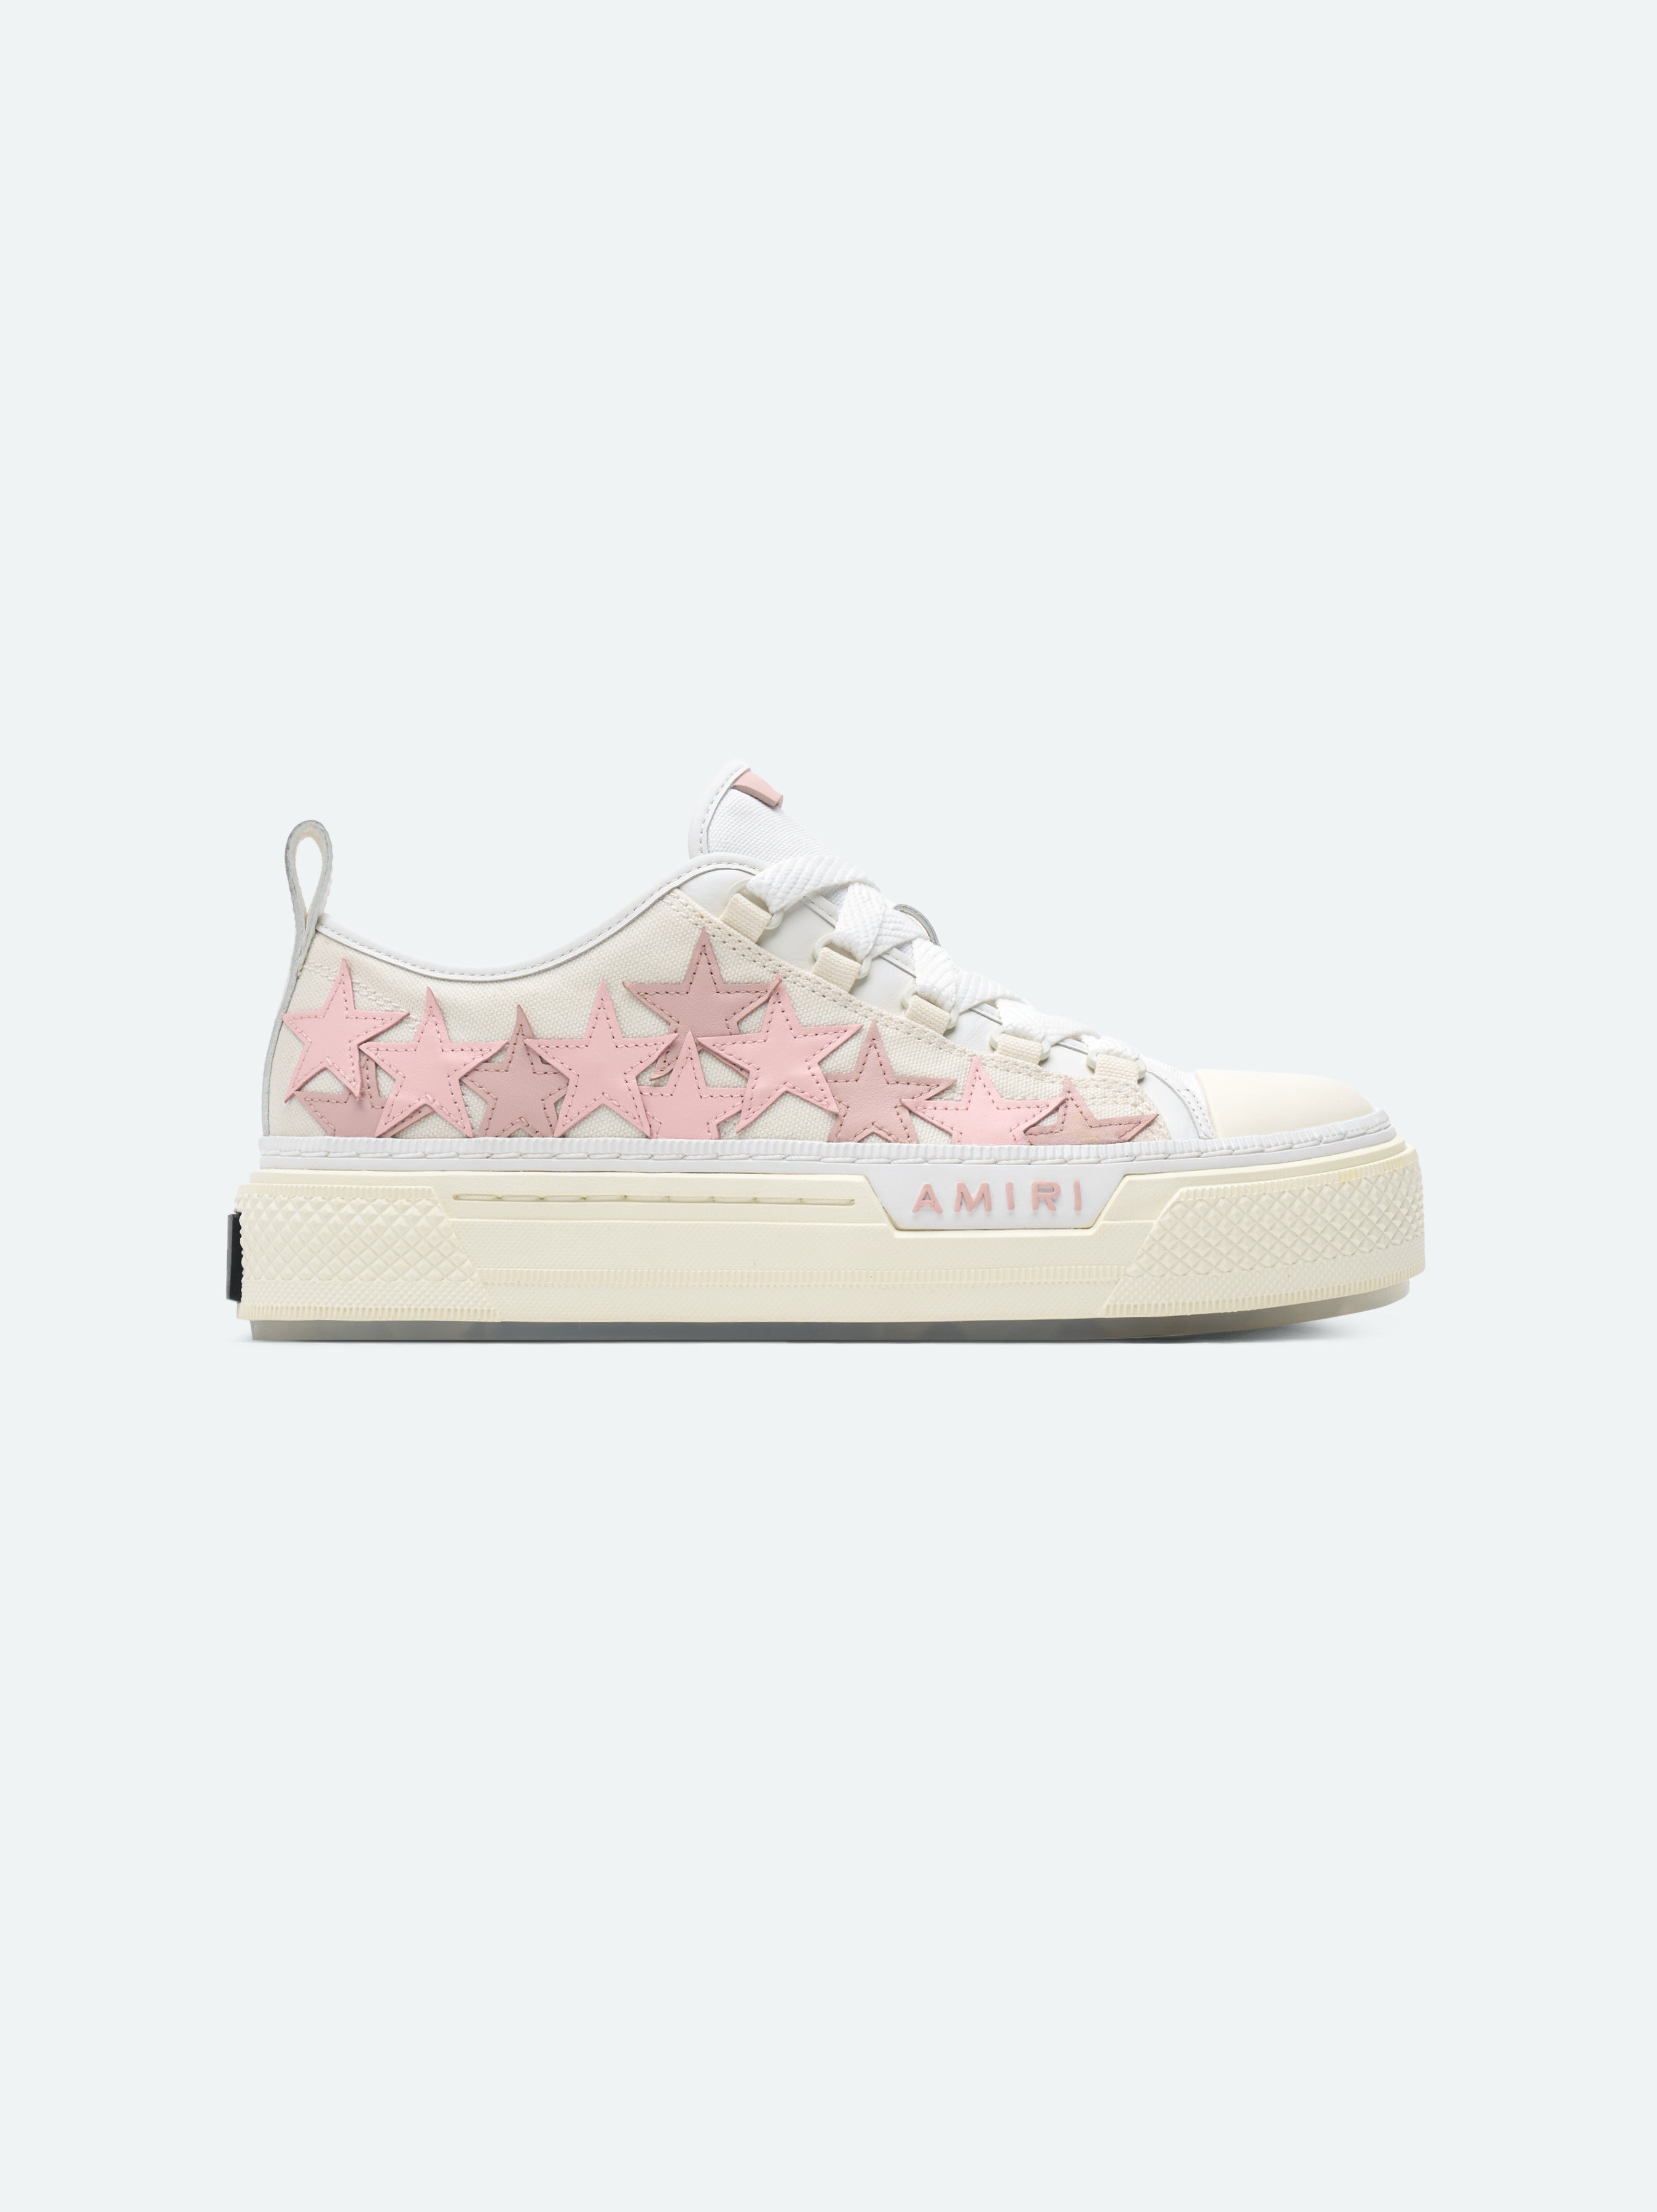 Product WOMEN- WOMEN'S STARS COURT LOW - WHITE/PINK featured image